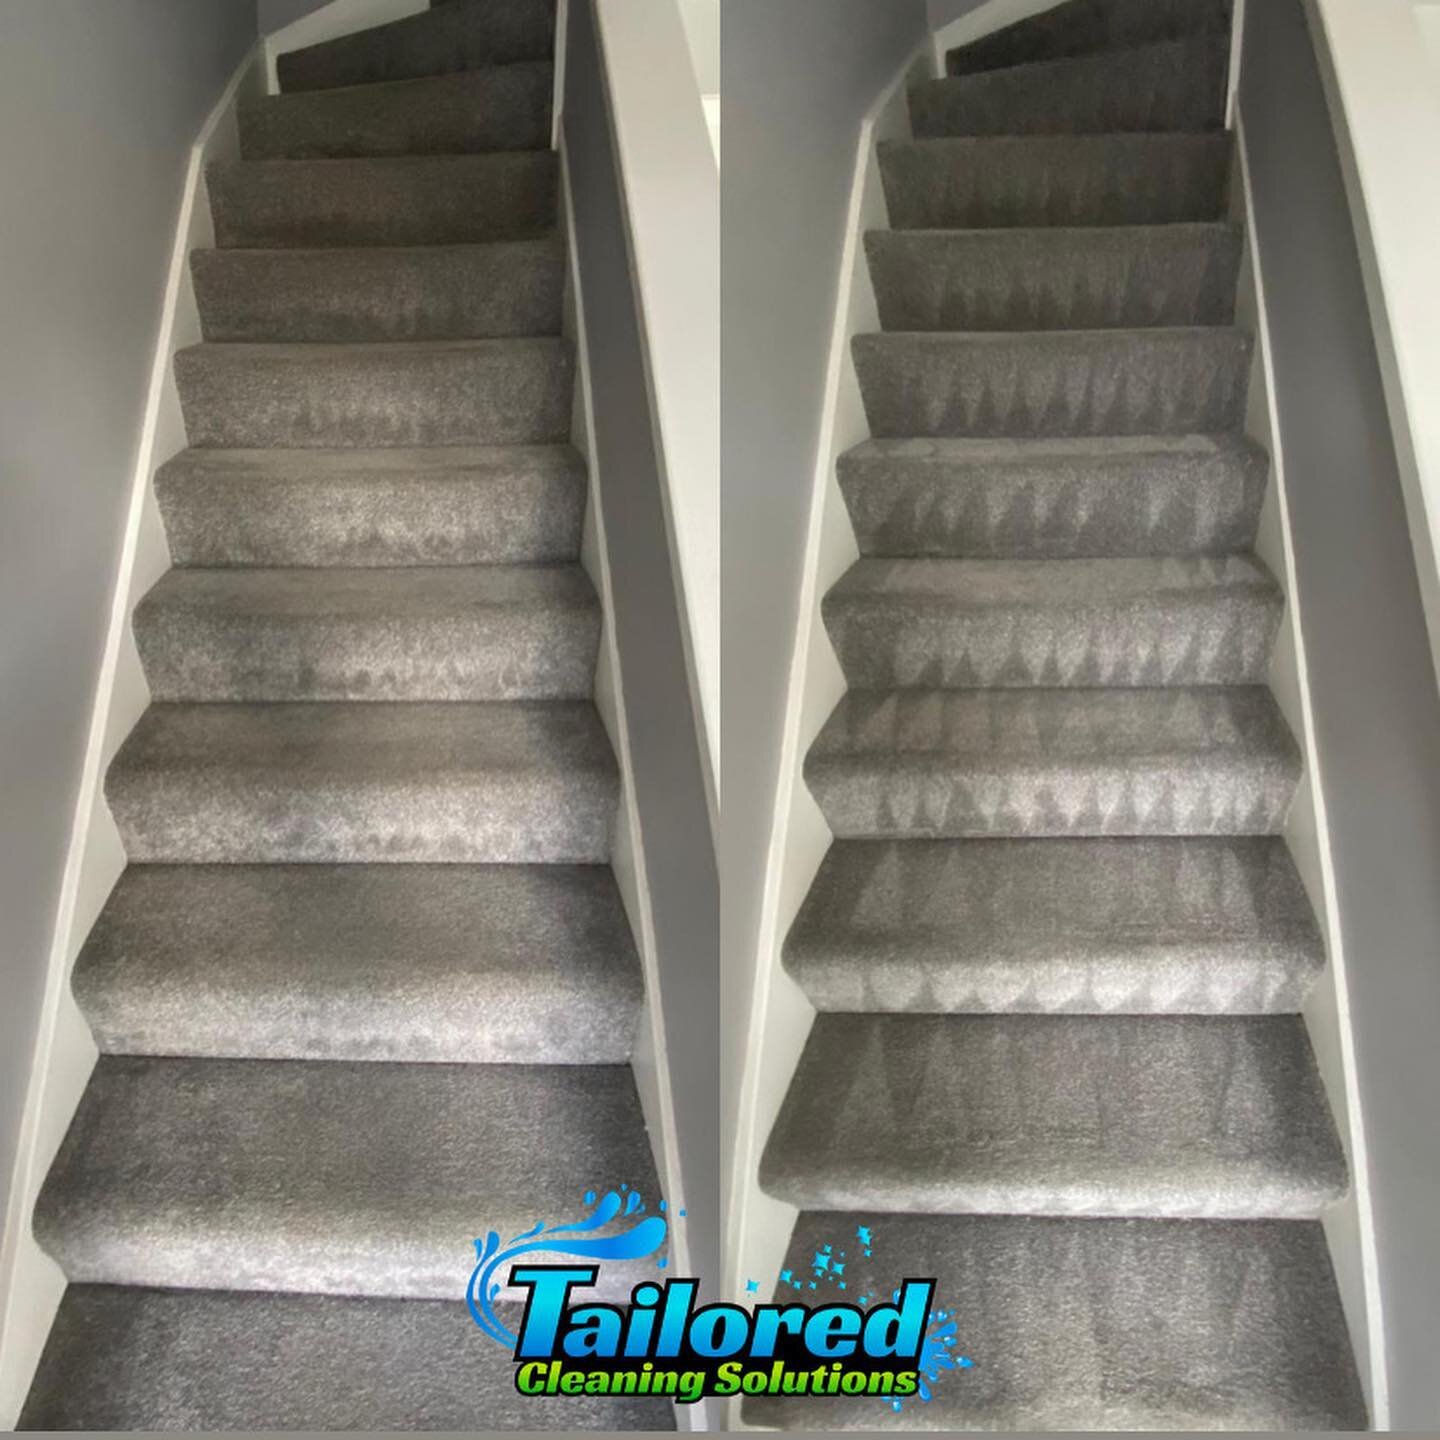 Some beautiful results from our job this weekend. A quick clean of this traffic area, had the stairs looking as good as new in the matter of a few minutes. Just look at the difference 🤩
____________________________________________________

BOOK A SE